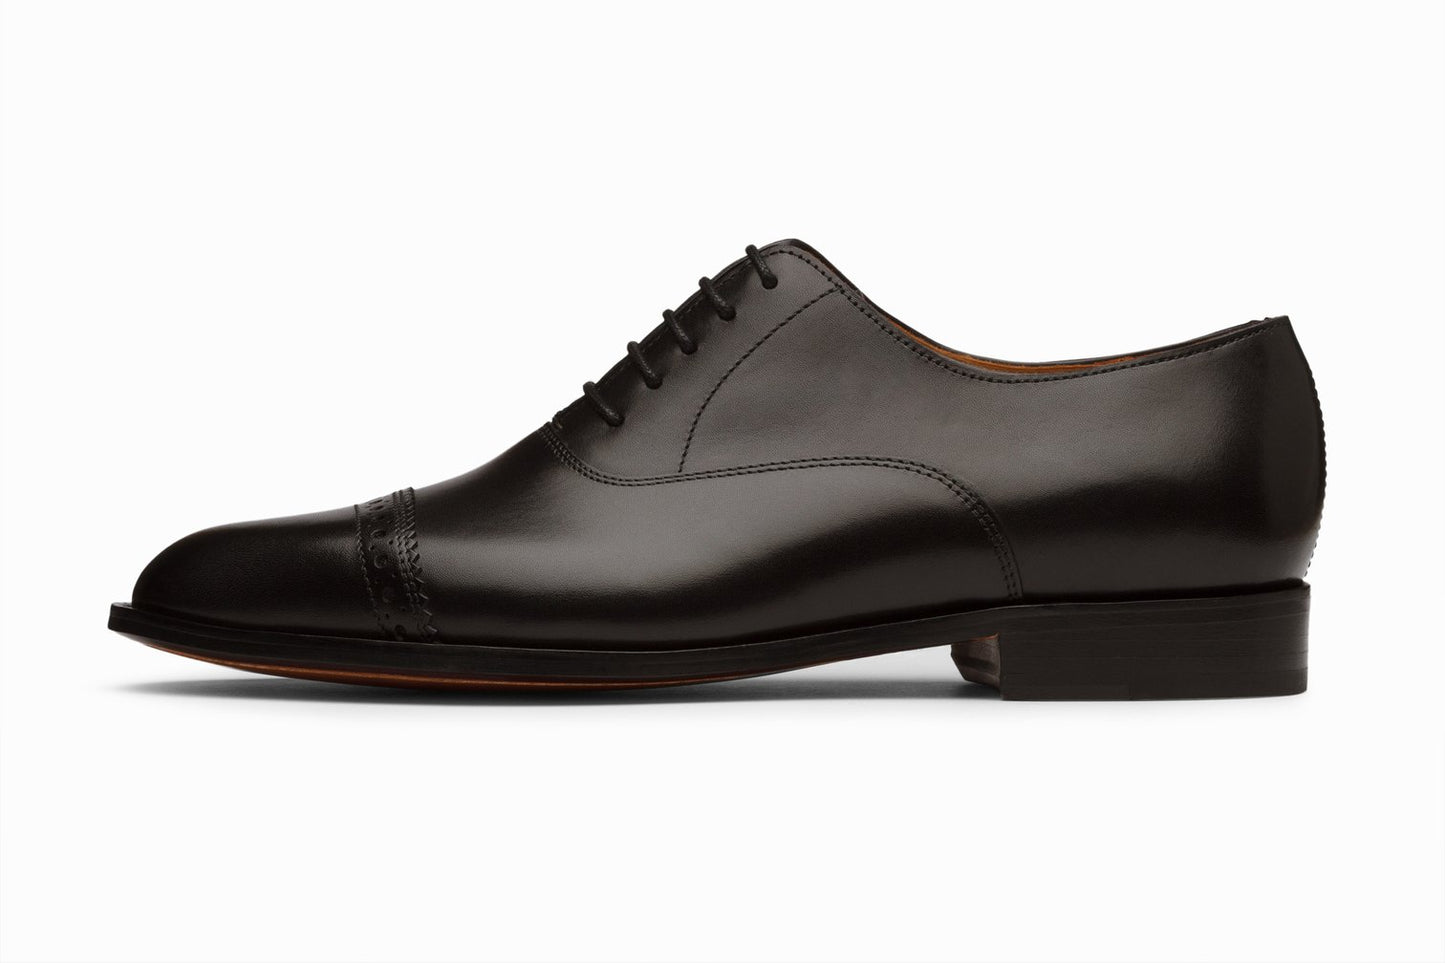 Quarter brogue oxford black leather shoes, formal oxford shoes for men in Dubai.